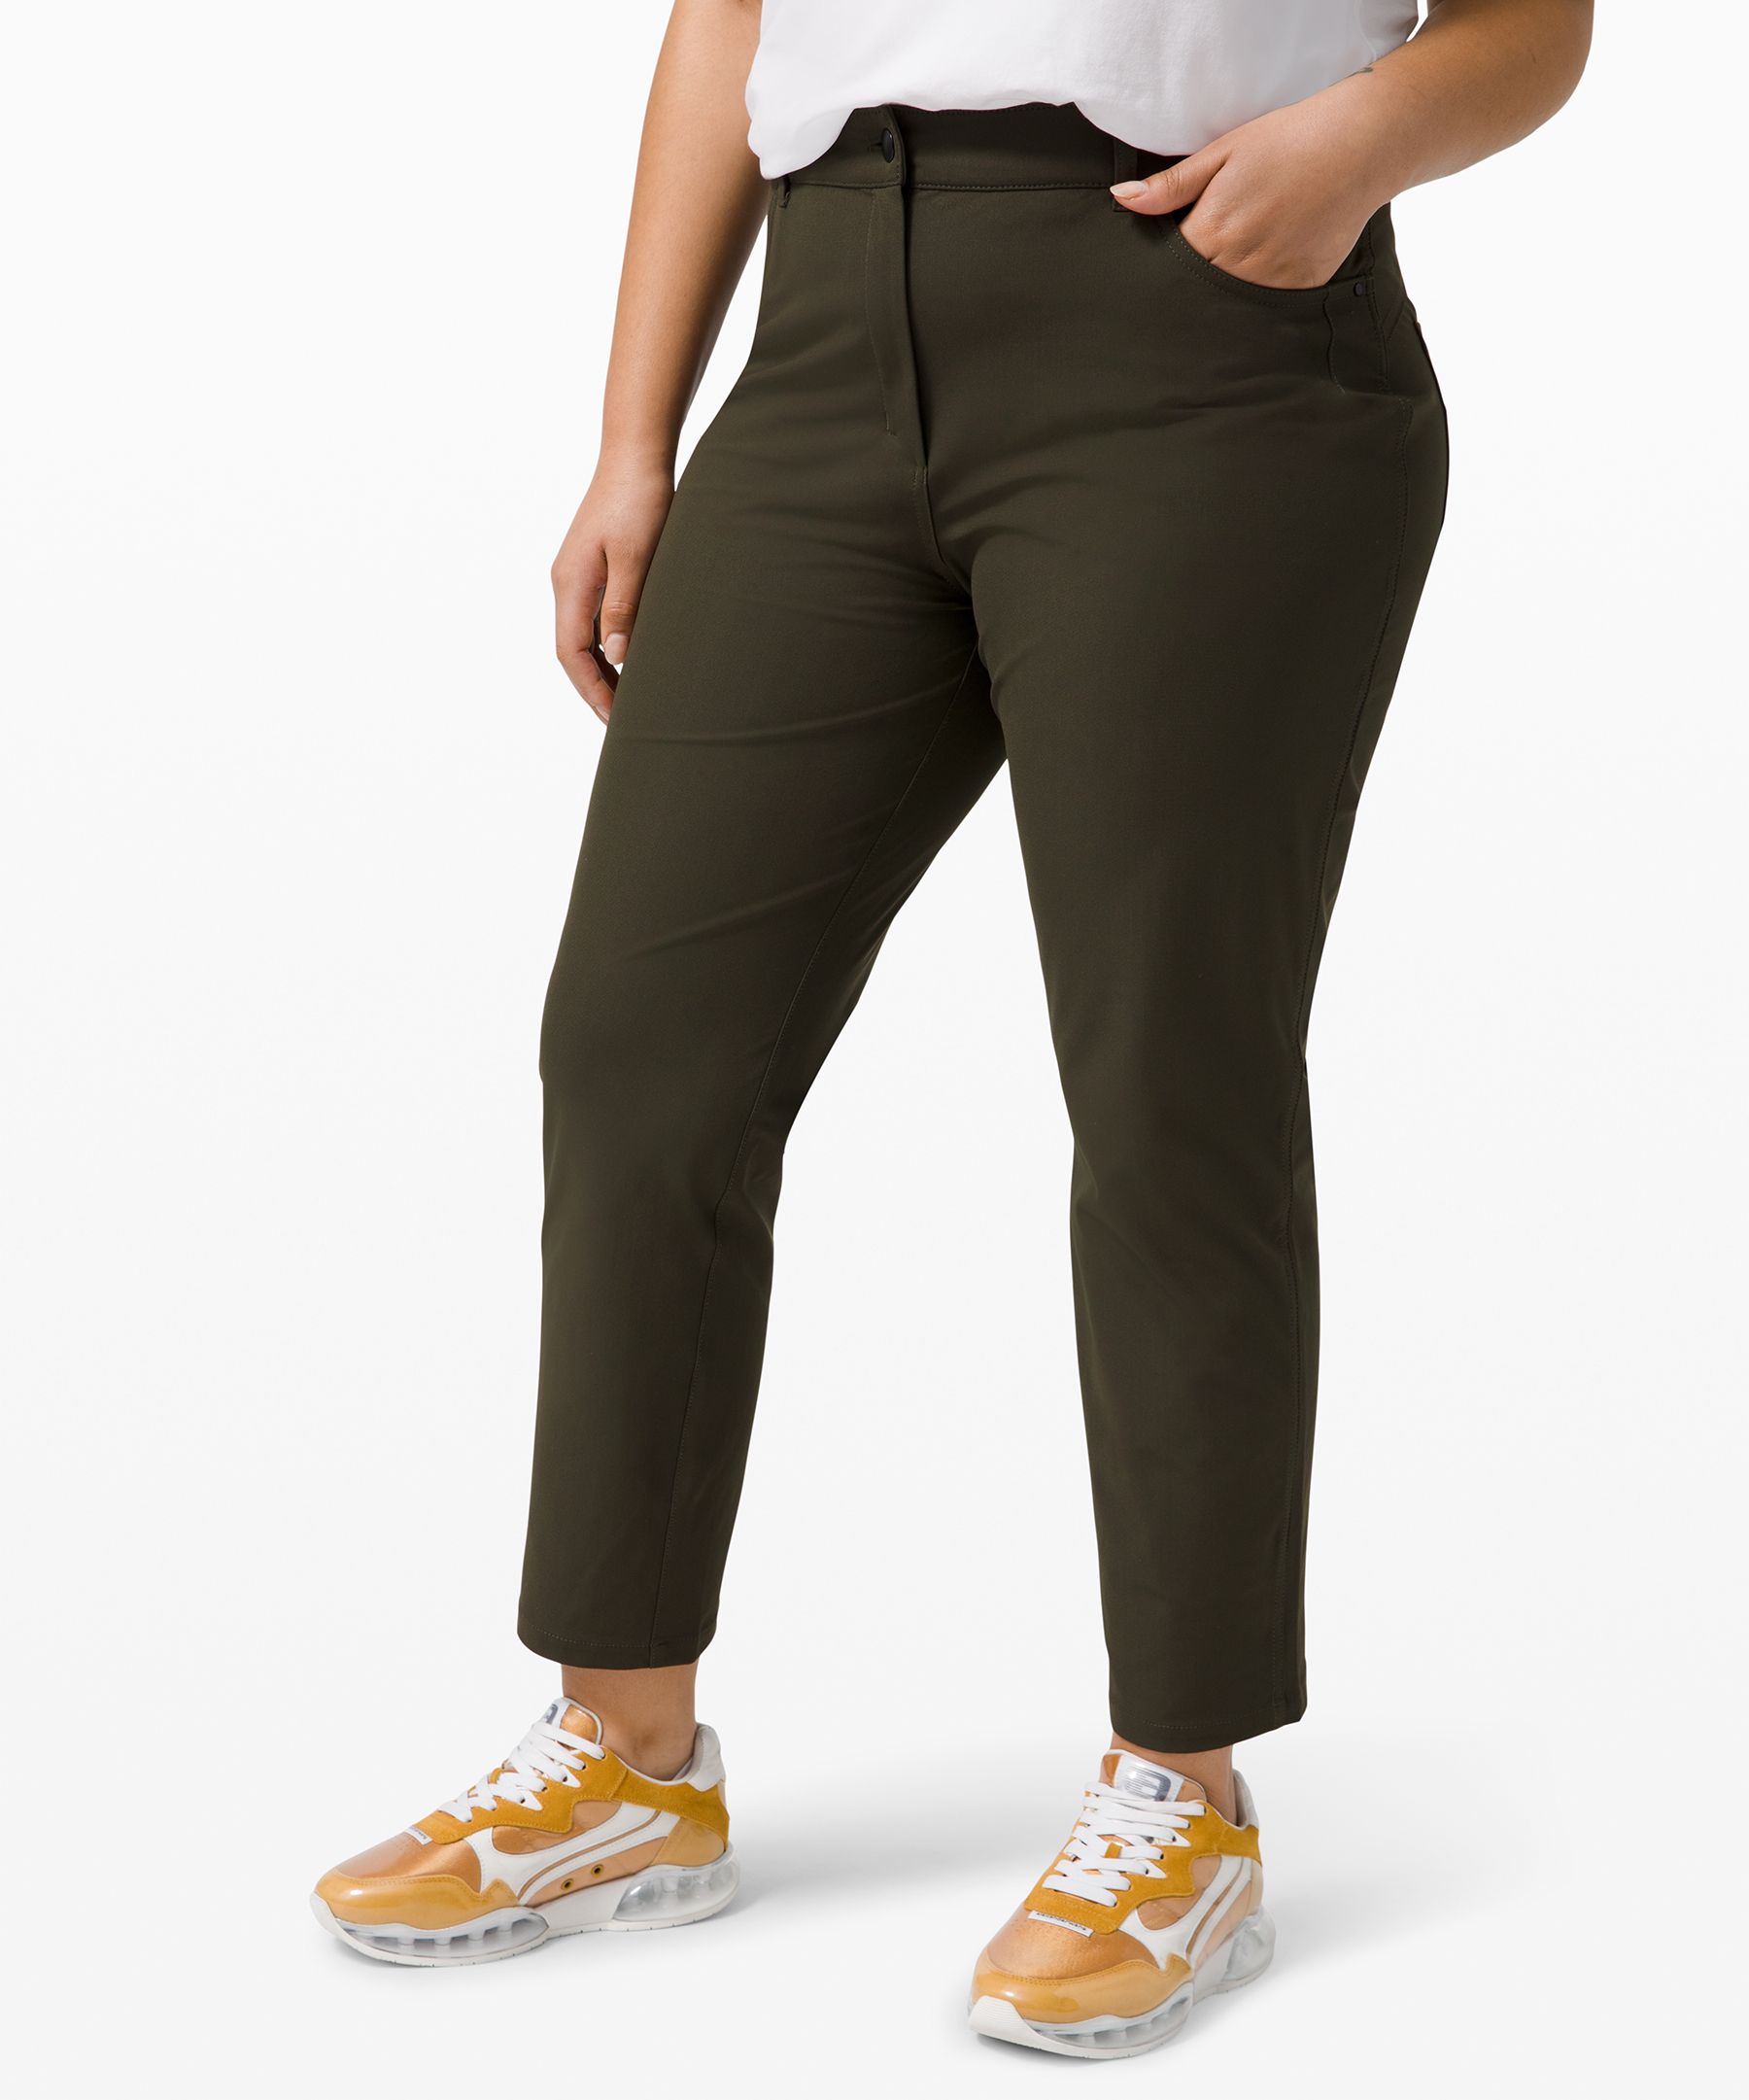 Lululemon City Sleek Pant Reviewed  International Society of Precision  Agriculture